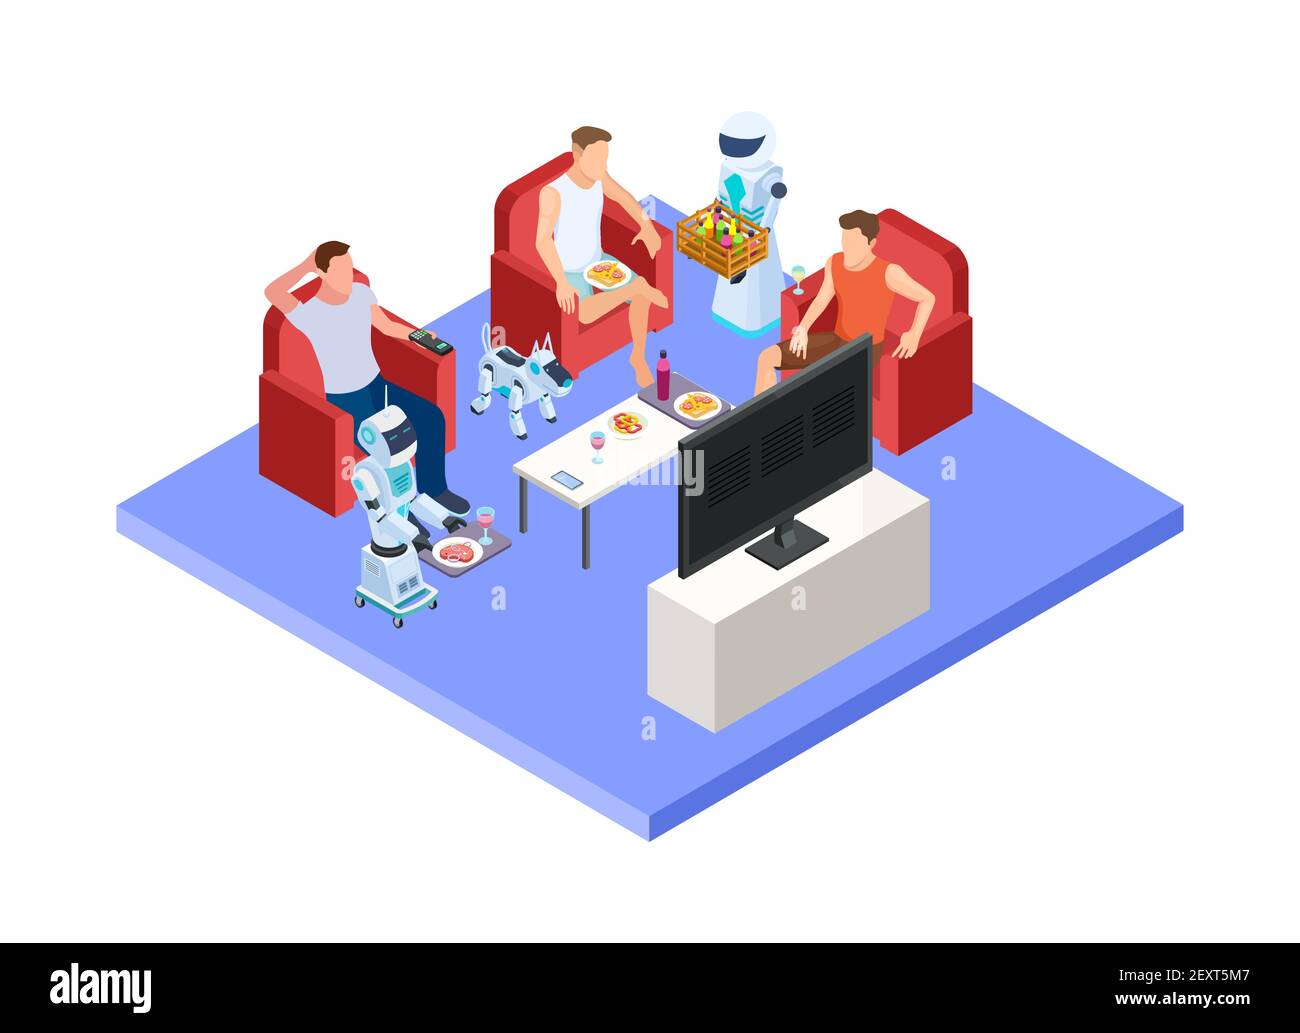 Robotic service staff. Vector people and androids. Isometric servant robots and men resting. Artificial humanoid worker, robotic help people illustration Stock Vector